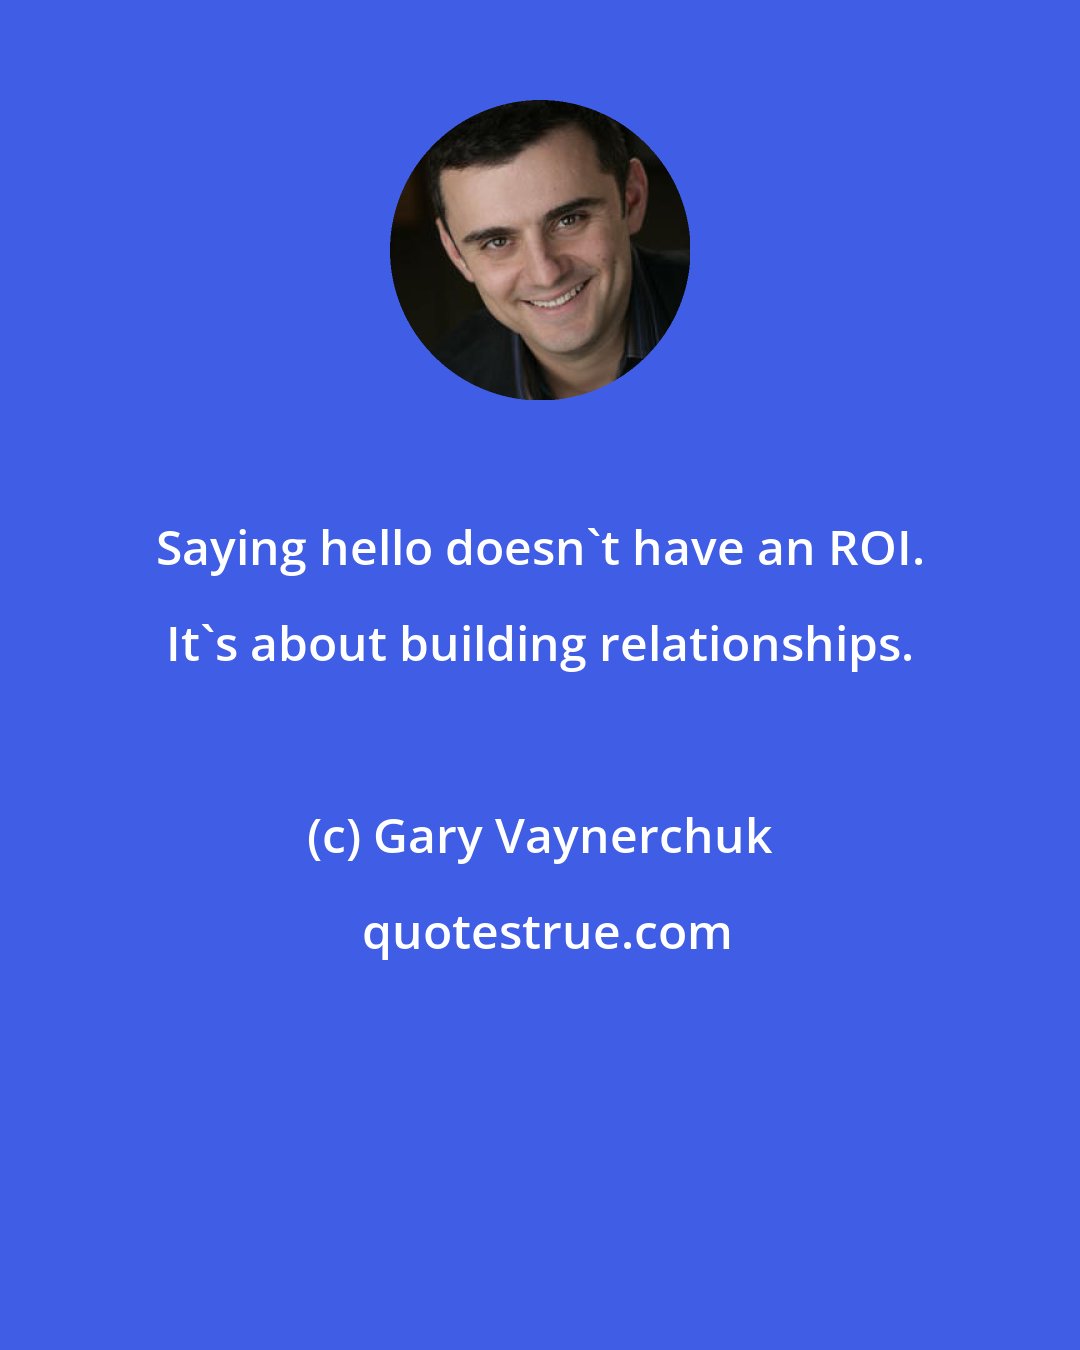 Gary Vaynerchuk: Saying hello doesn't have an ROI. It's about building relationships.